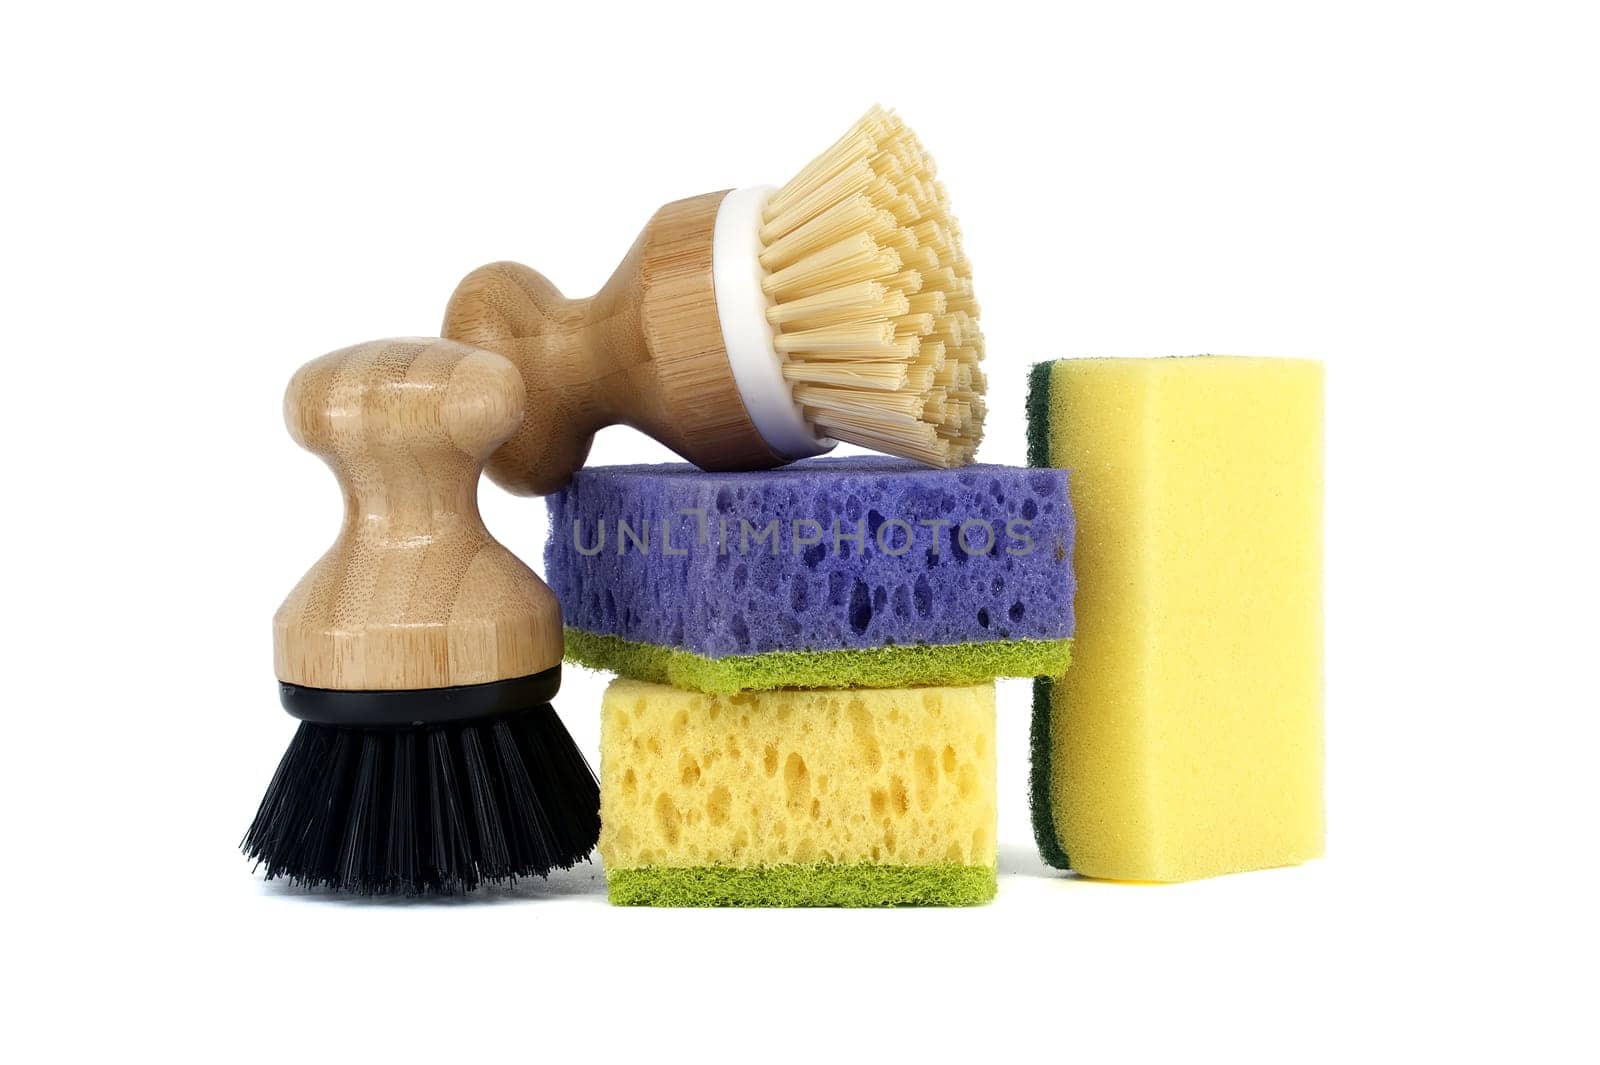 Three sponges, each a different color purple, yellow, and blue and two brushes with wooden handles isolated on white background, cleaning tools